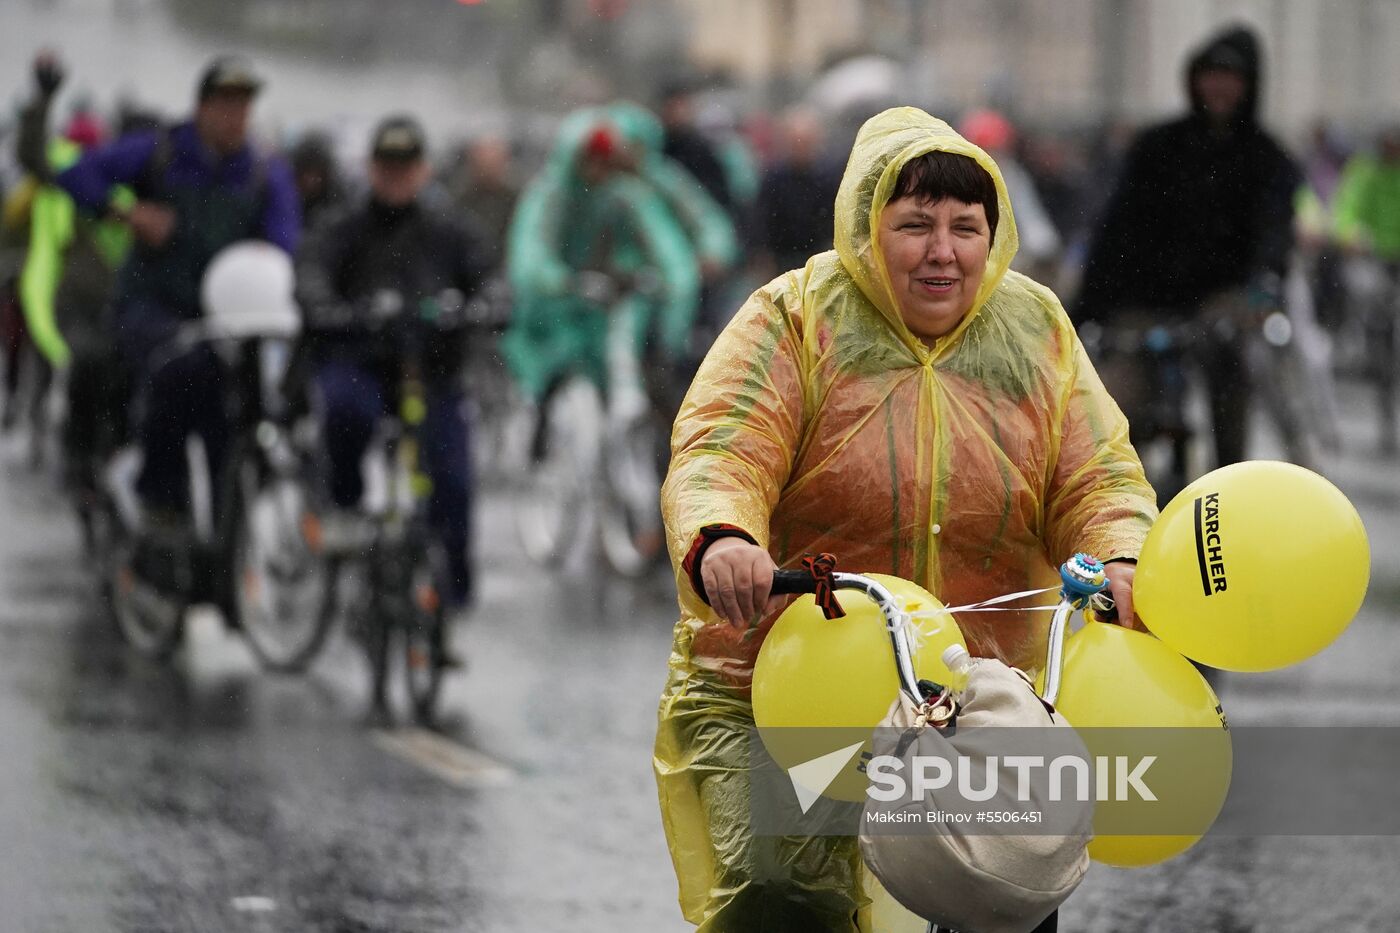 Moscow Bicycle Parade 2018